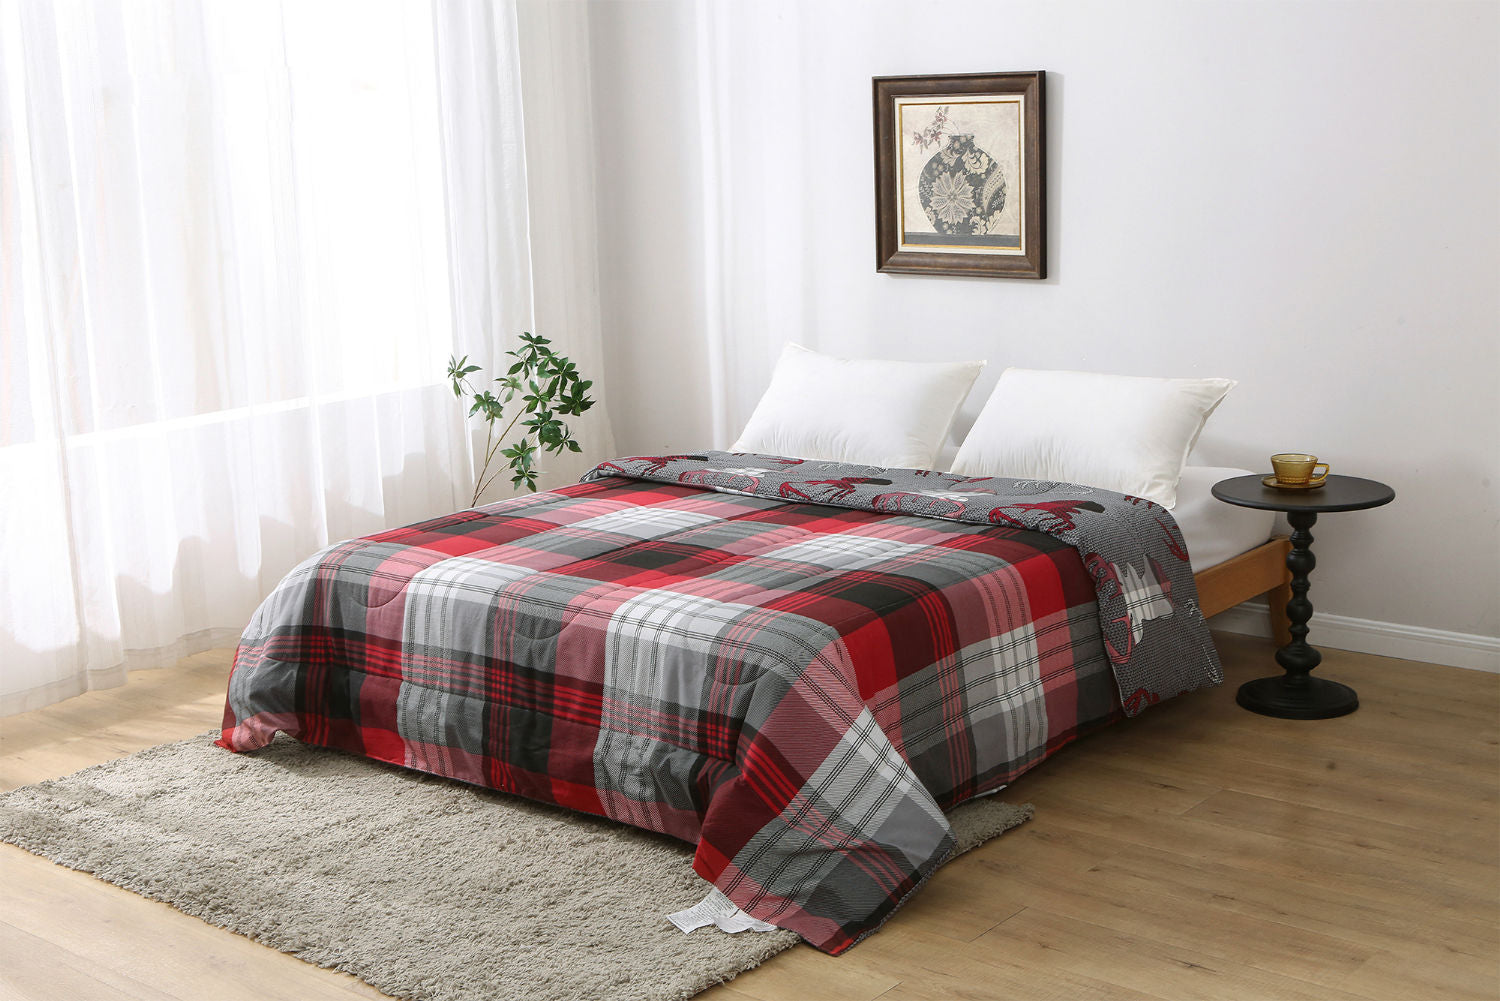 Woven Flannel Pigemnt Printed Comforter Dq. Plaid